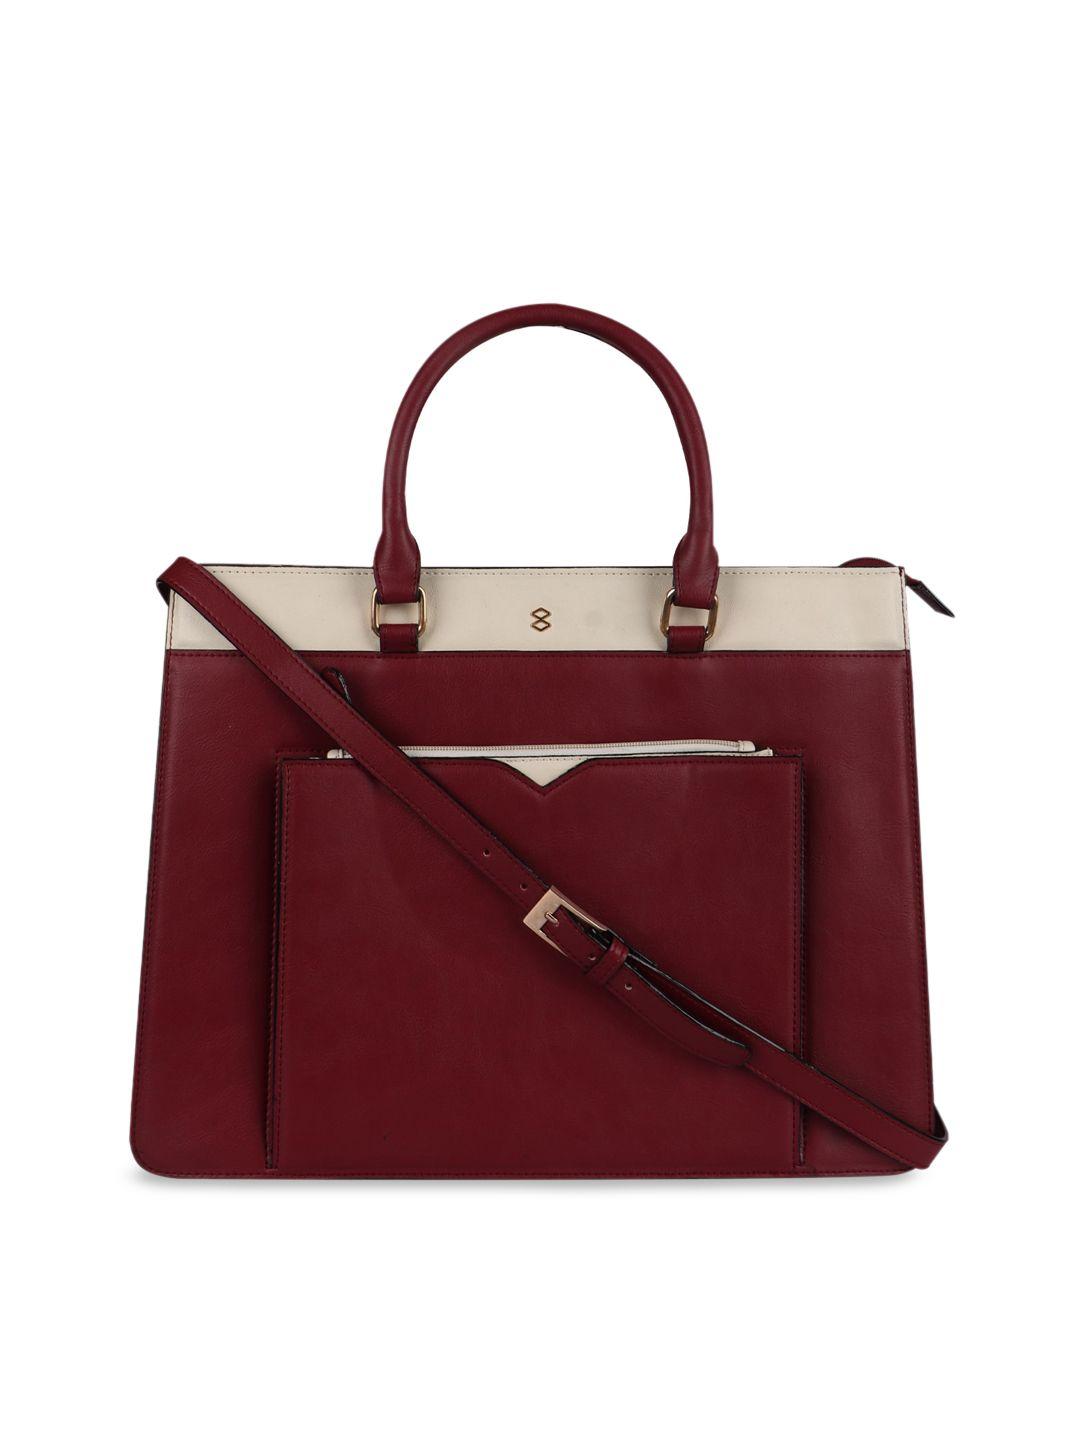 horra maroon pu oversized structured handheld bag with tasselled